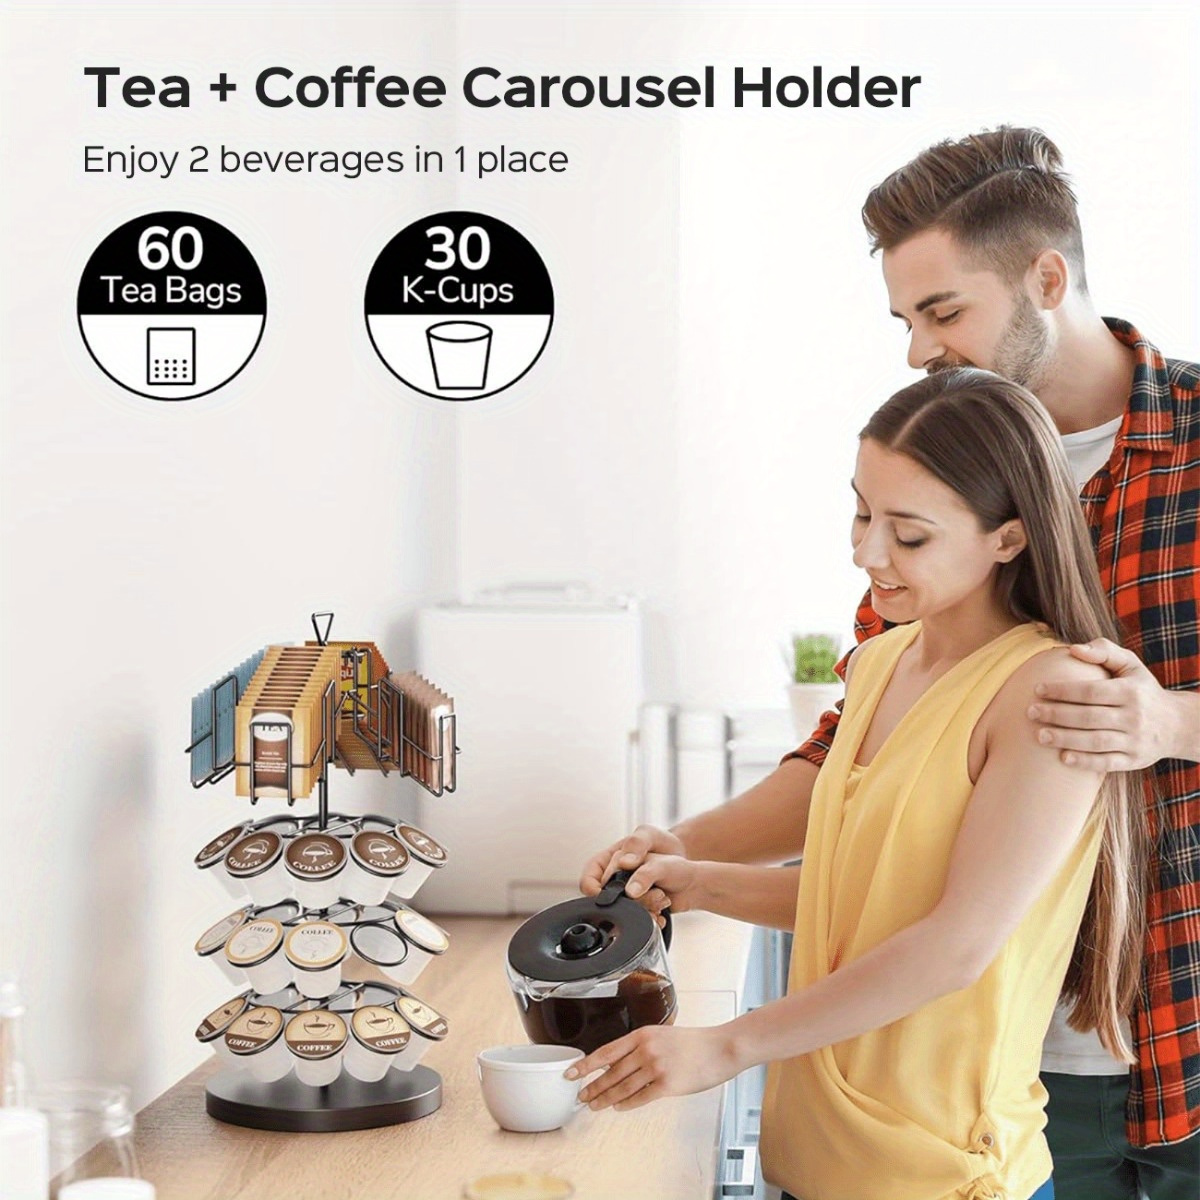 

K Cup & Tea Bag Holder, Spins 360-degrees 20/30 And 60 Tea Bags- Tea Organizer For Tea Bags & Coffee Pod Carousel Stand For Kitchen Office Countertop Coffee Bar Or Coffee Station, Black